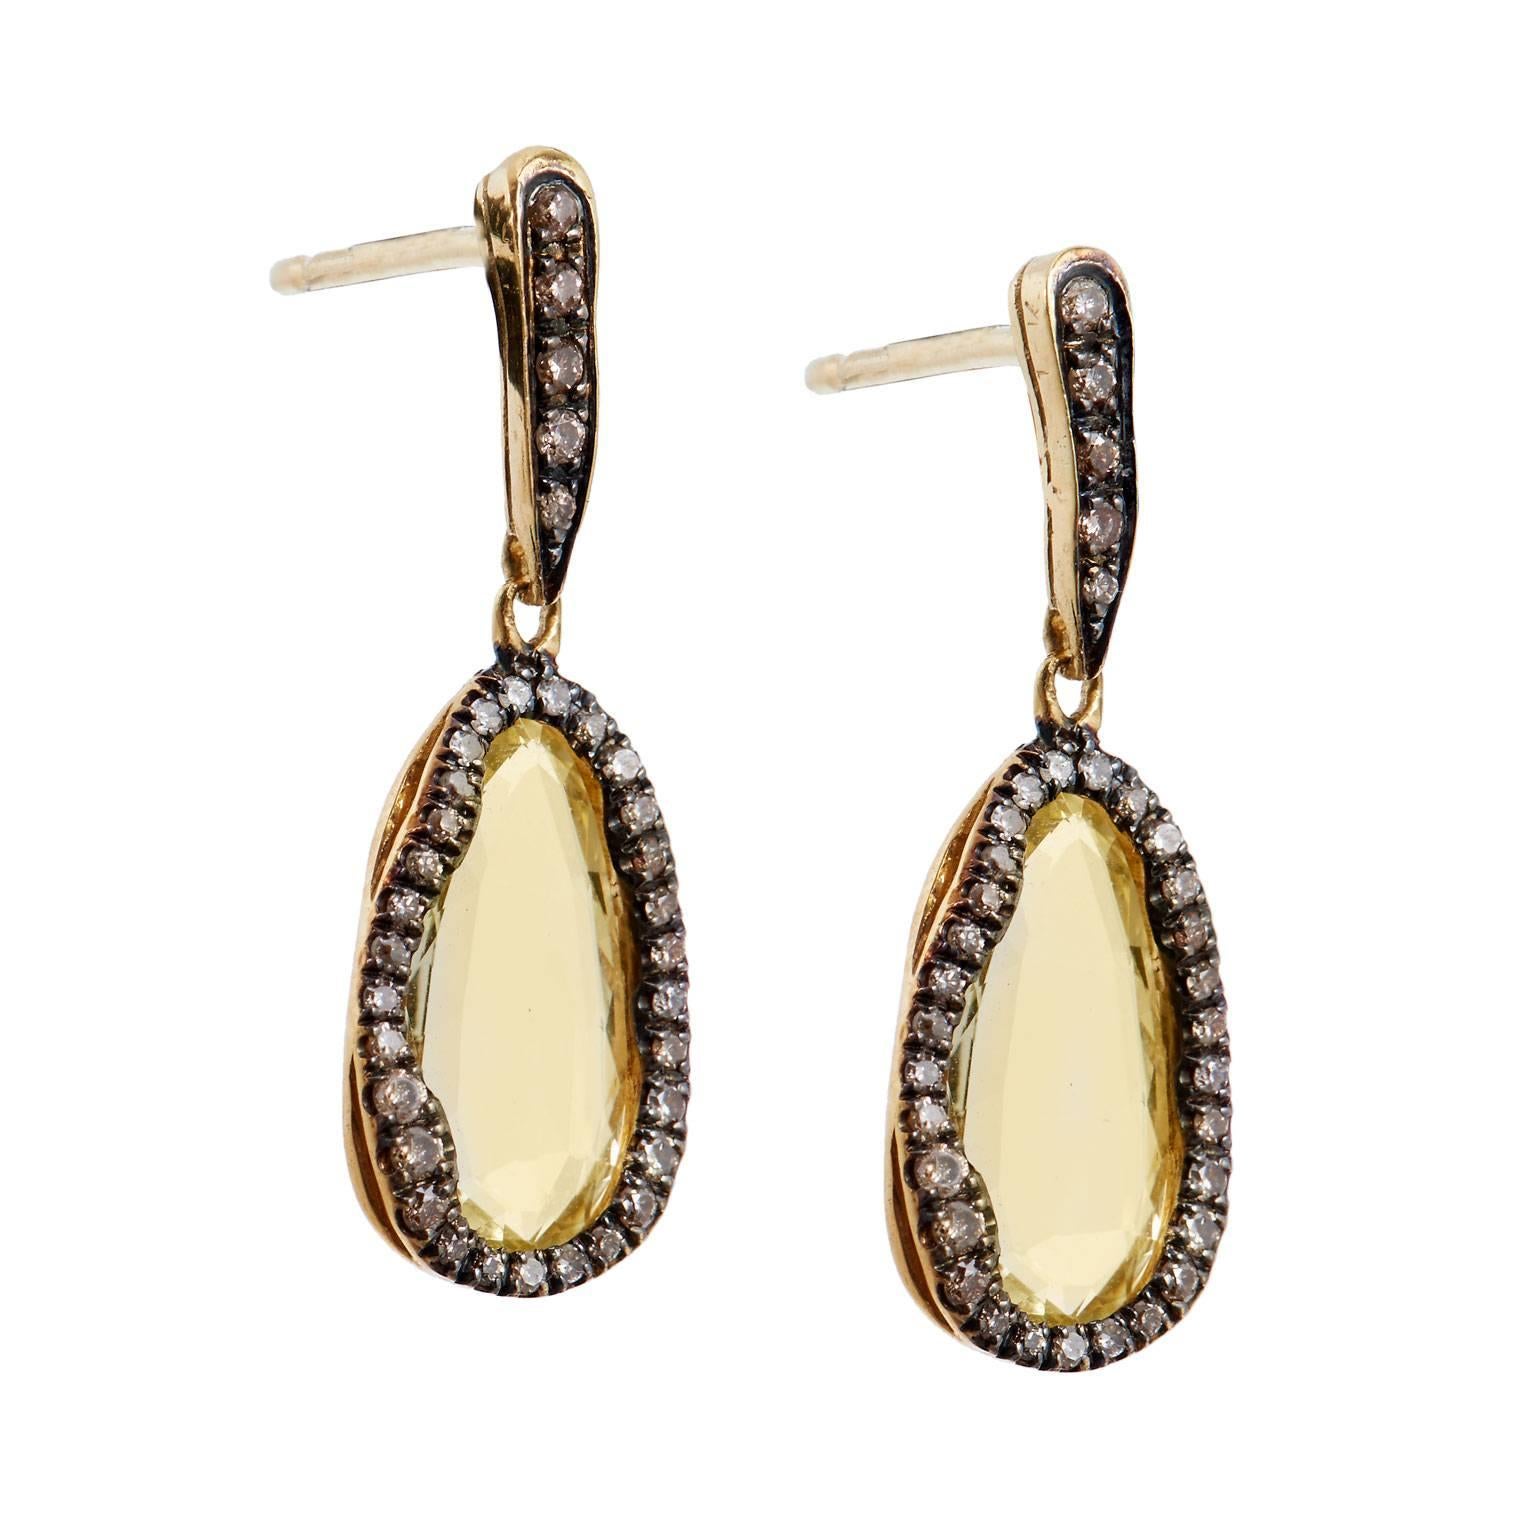 Sumptuous lemon quartz mingles with 0.40 carat of champagne diamonds in an organic and subtle display in these pear-shaped 18 karat yellow gold stud drop earrings.
